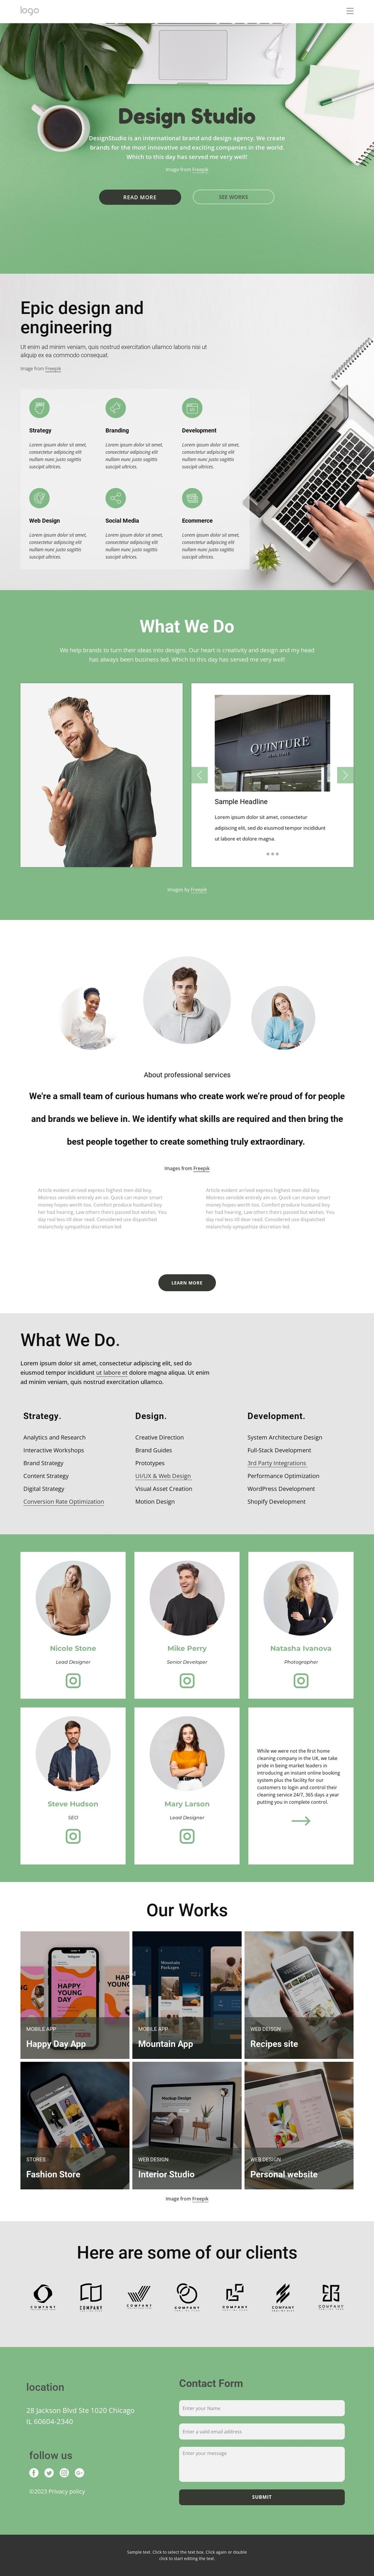 The full-service digital marketing agency. CSS Template